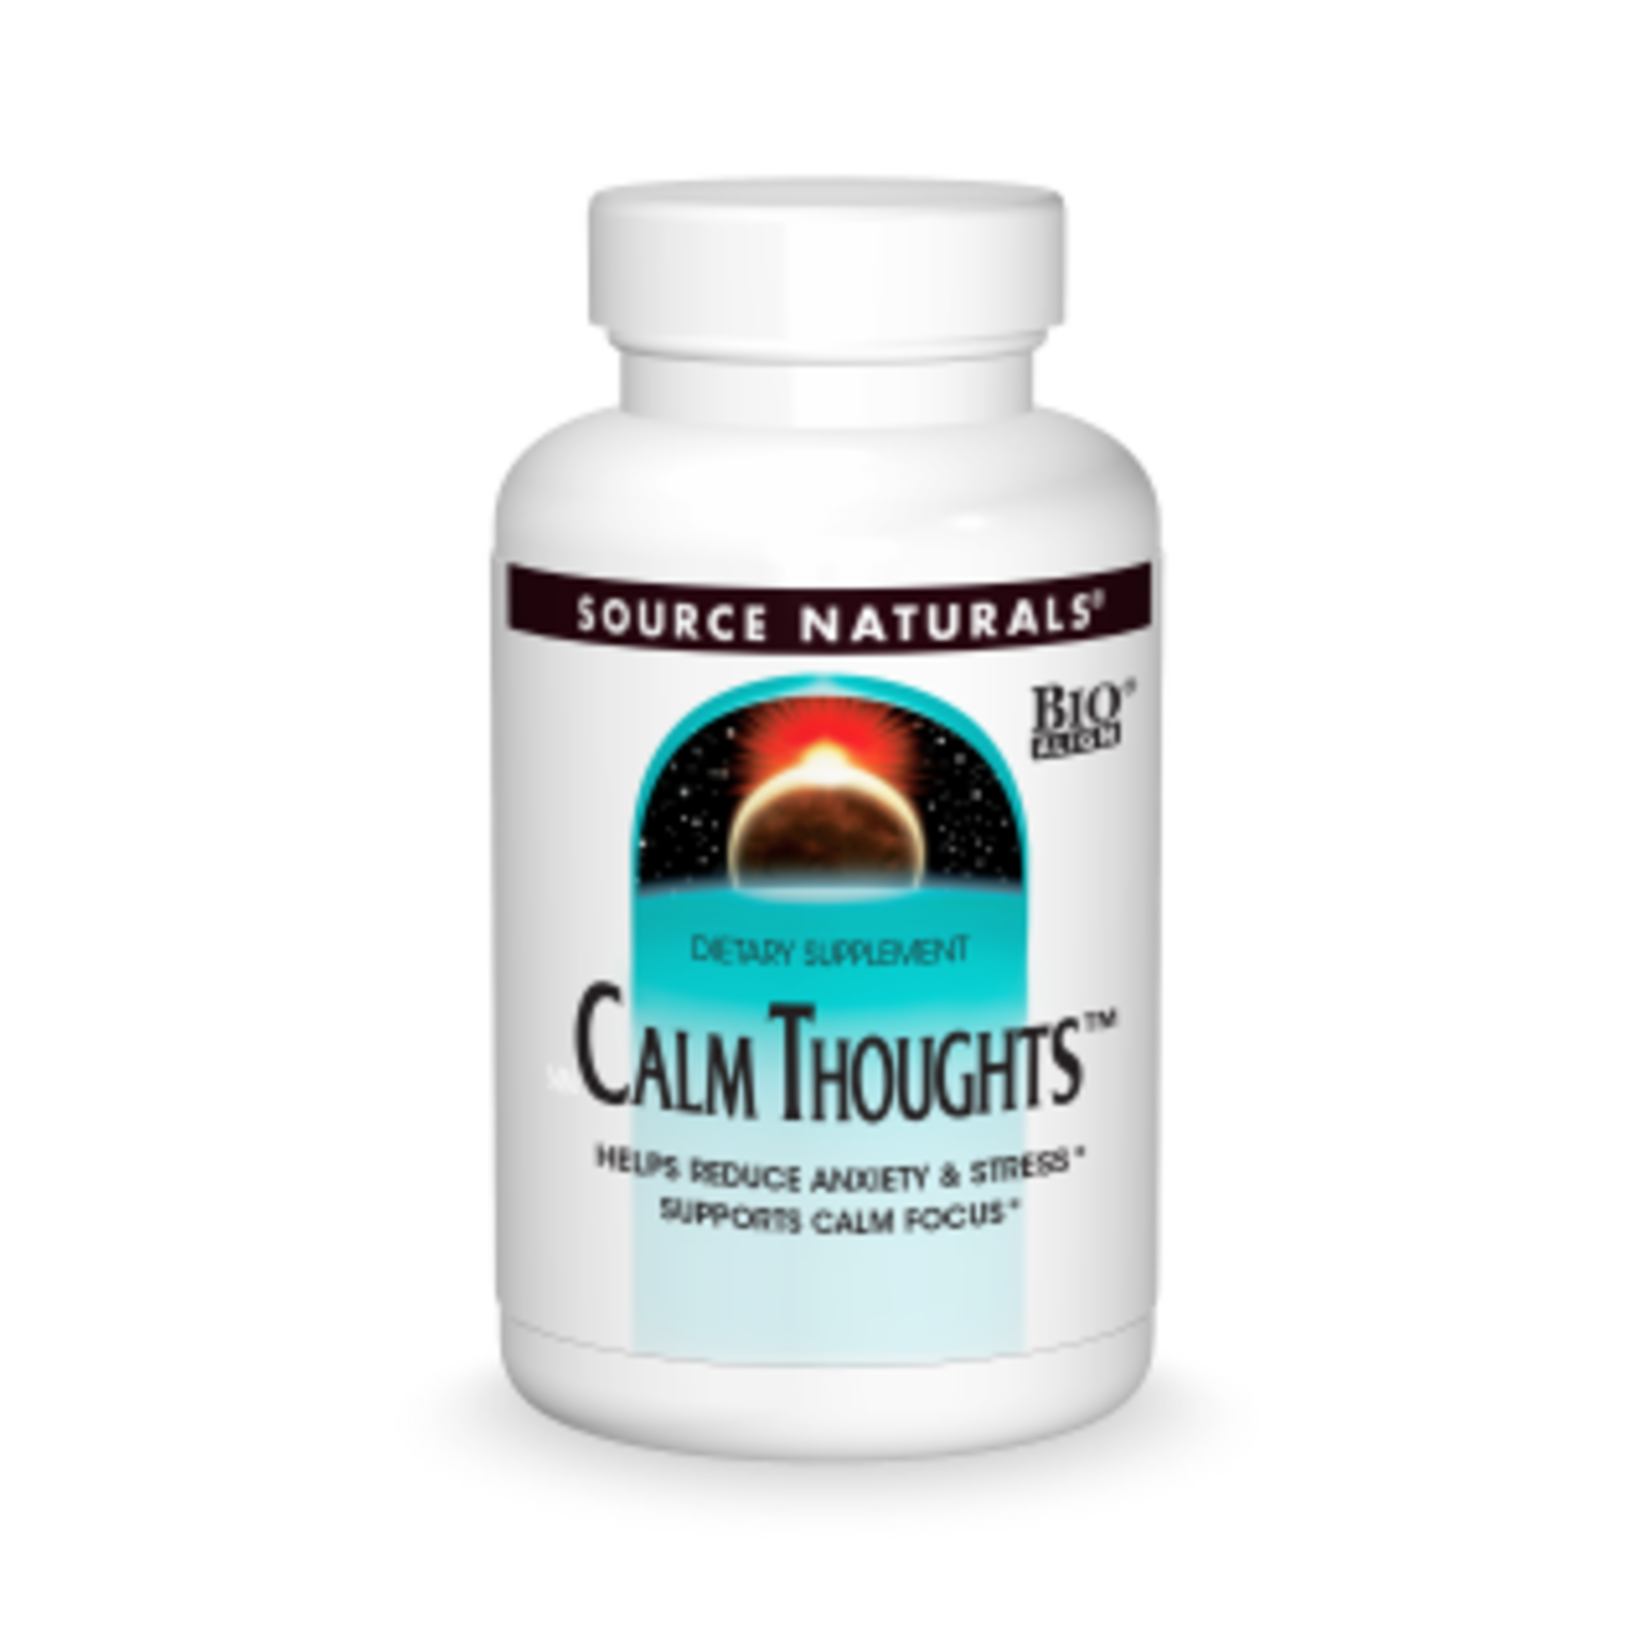 Source Naturals Source Naturals - Calm Thoughts - 90 Tablets